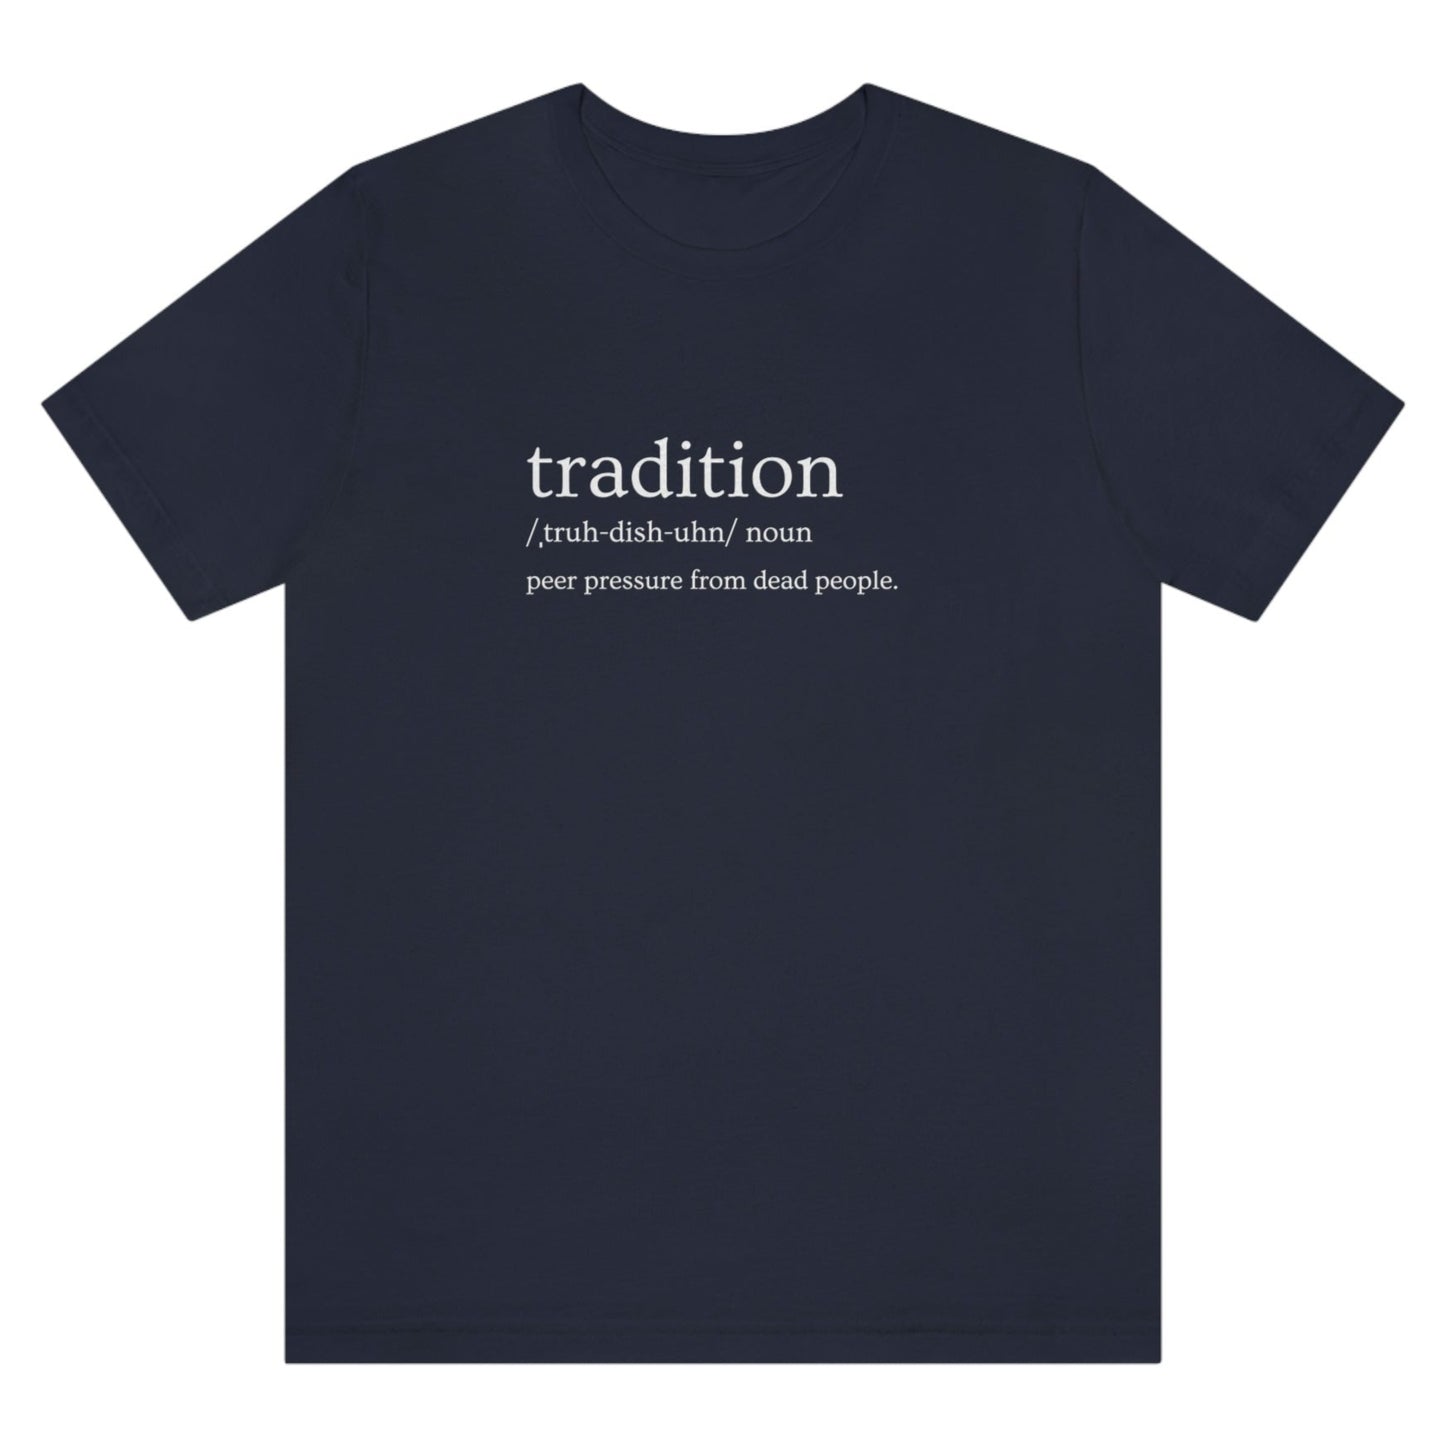 tradition-definition-peer-pressure-from-dead-people-navy-t-shirt